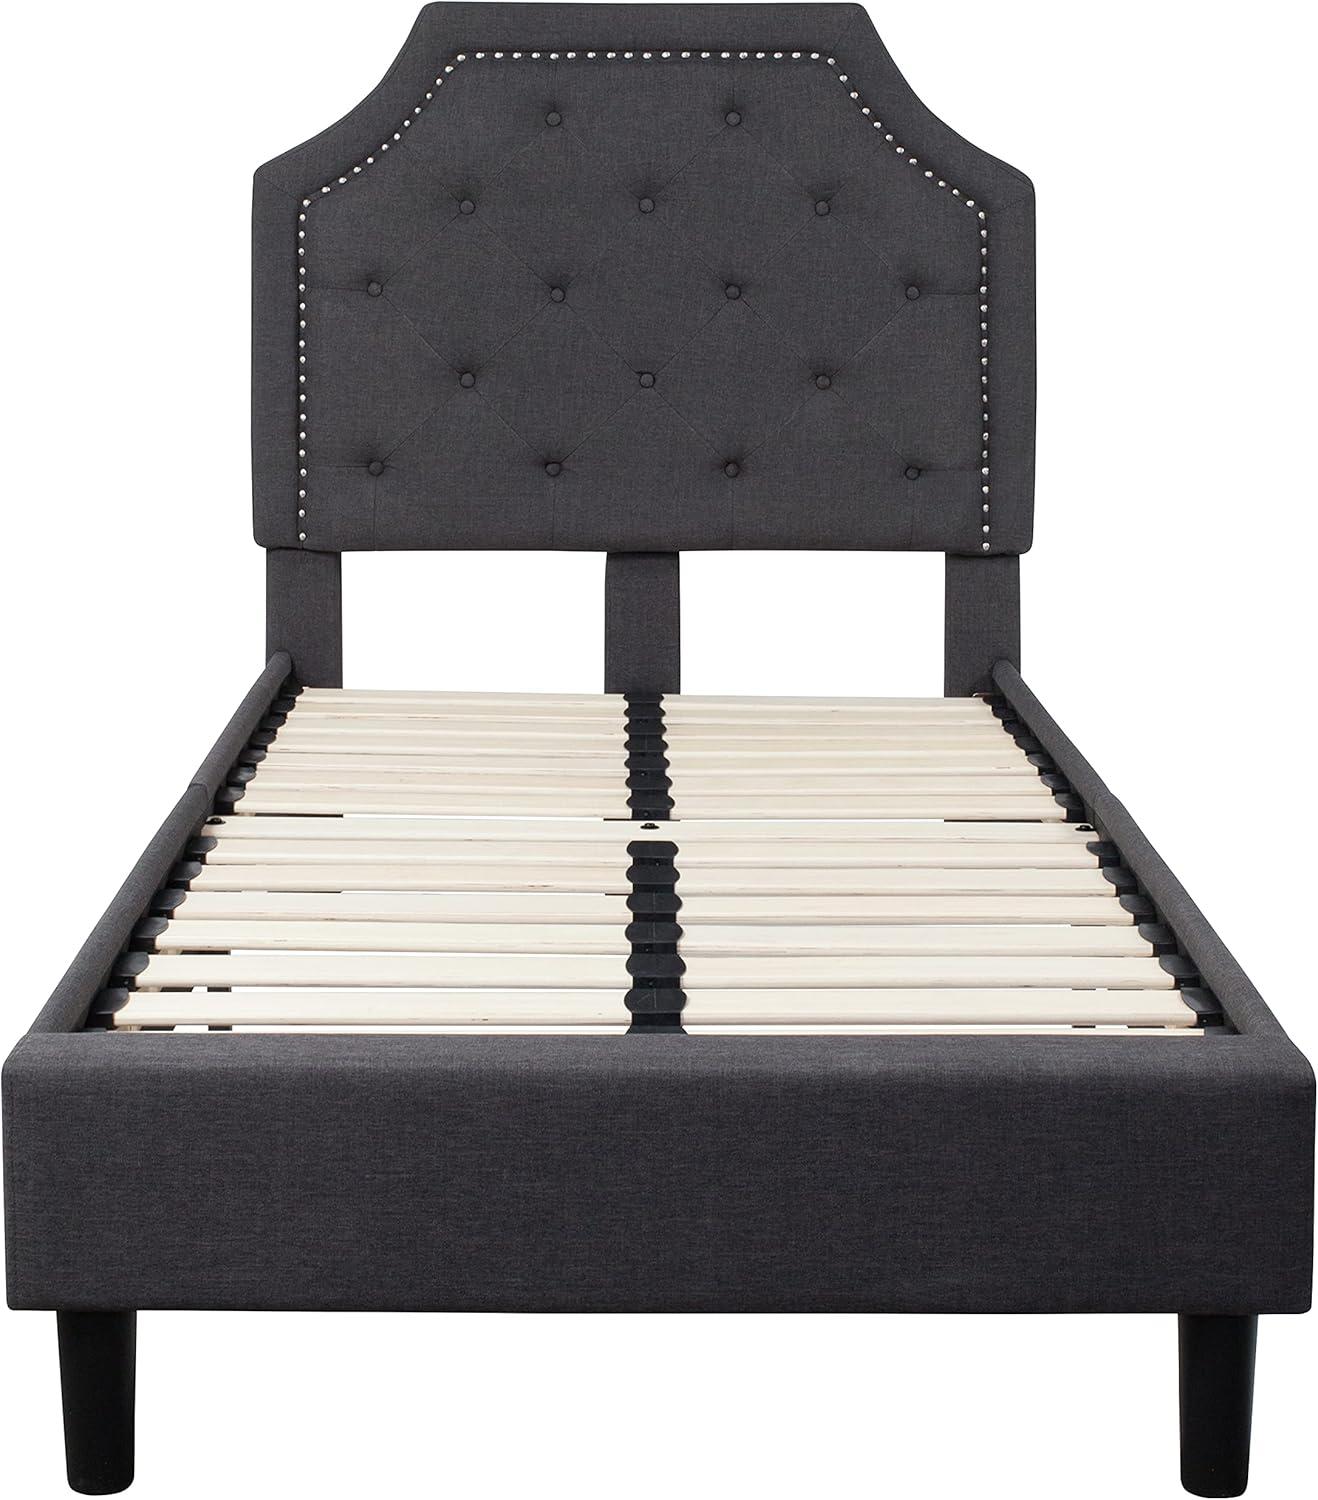 Dark Gray Twin Upholstered Platform Bed with Nailhead Trim